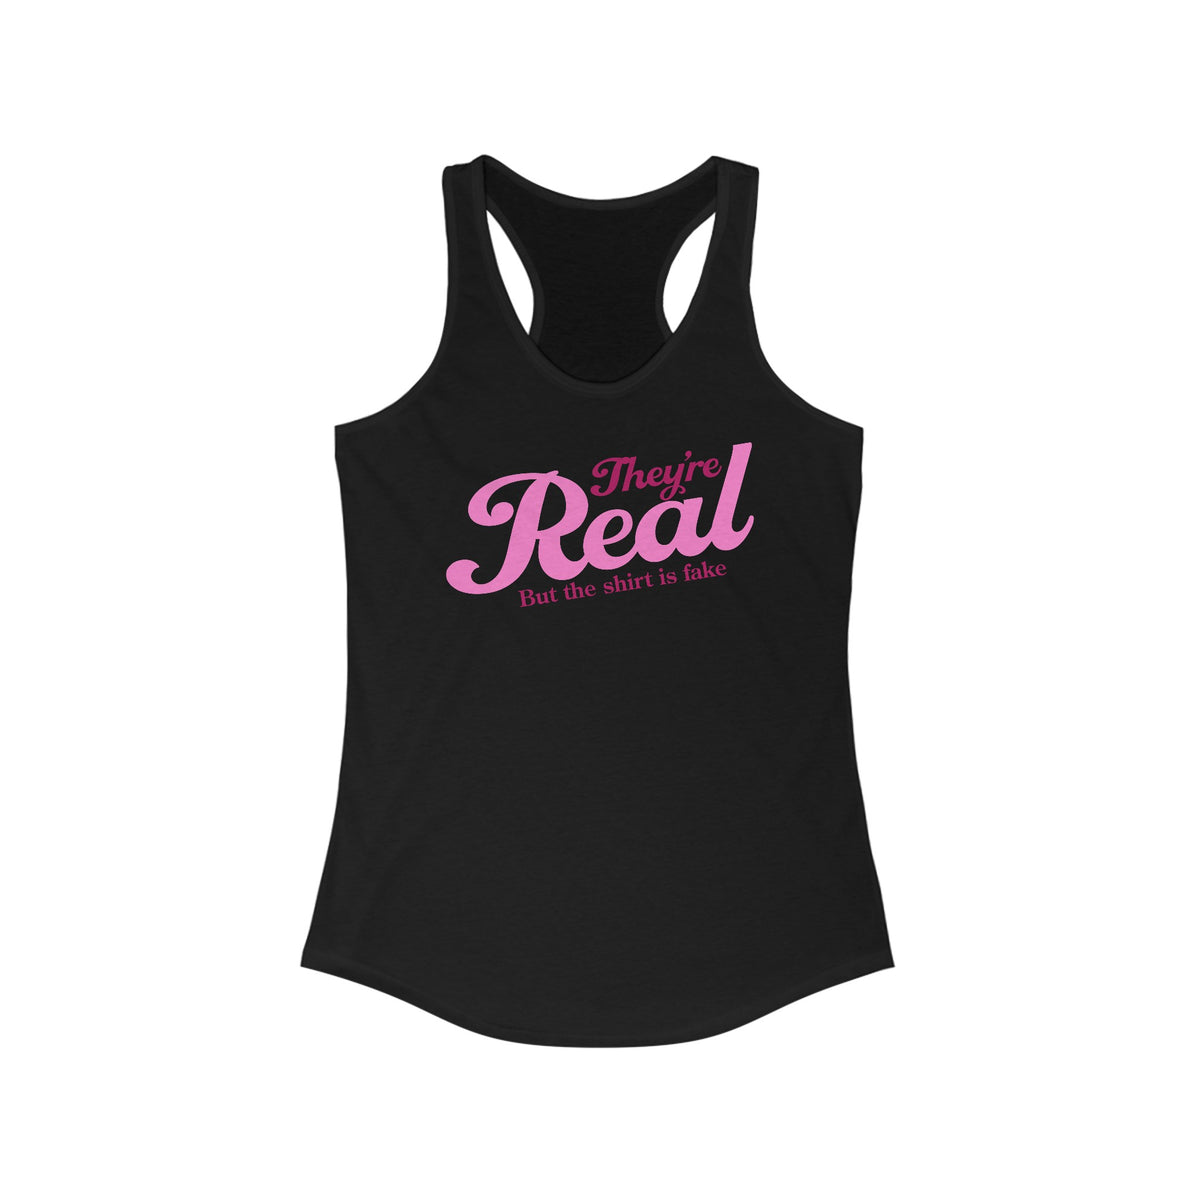 They're Real But The Shirt Is Fake - Women’s Racerback Tank